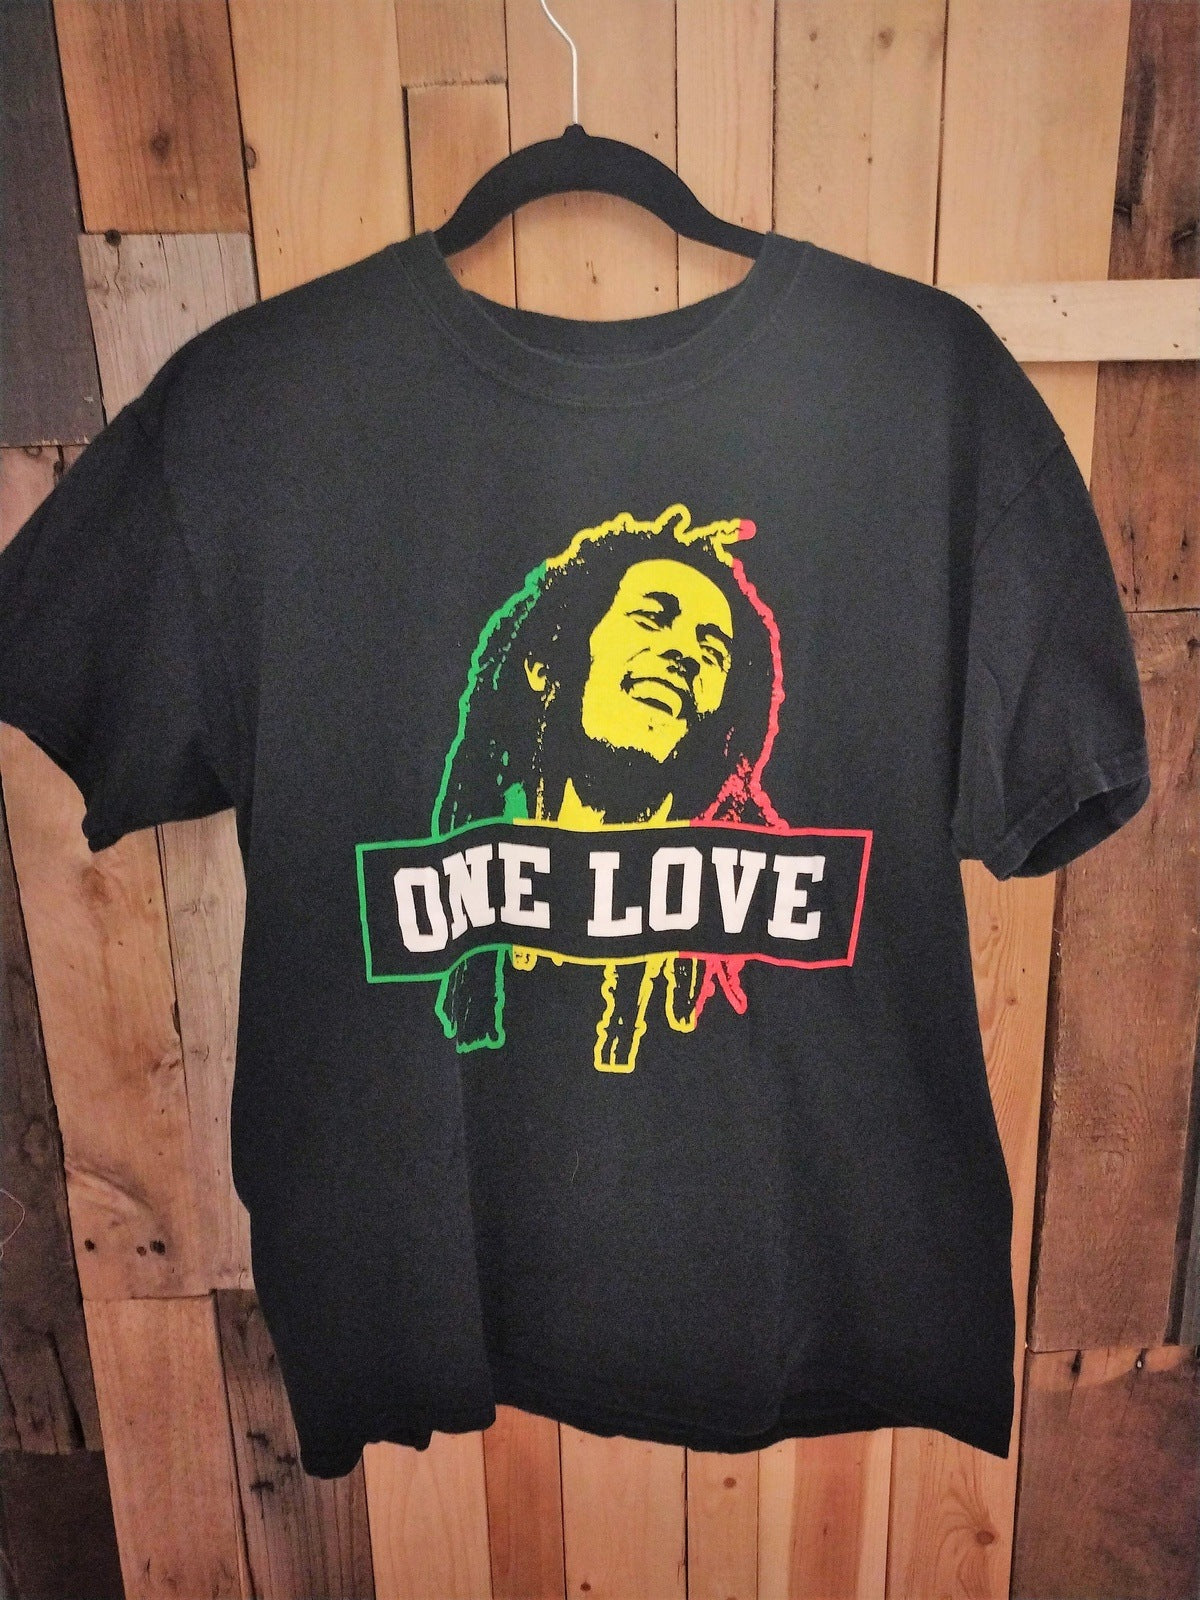 Bob Marley Official Merchandise T Shirt "One Love" Size Large 616561WH